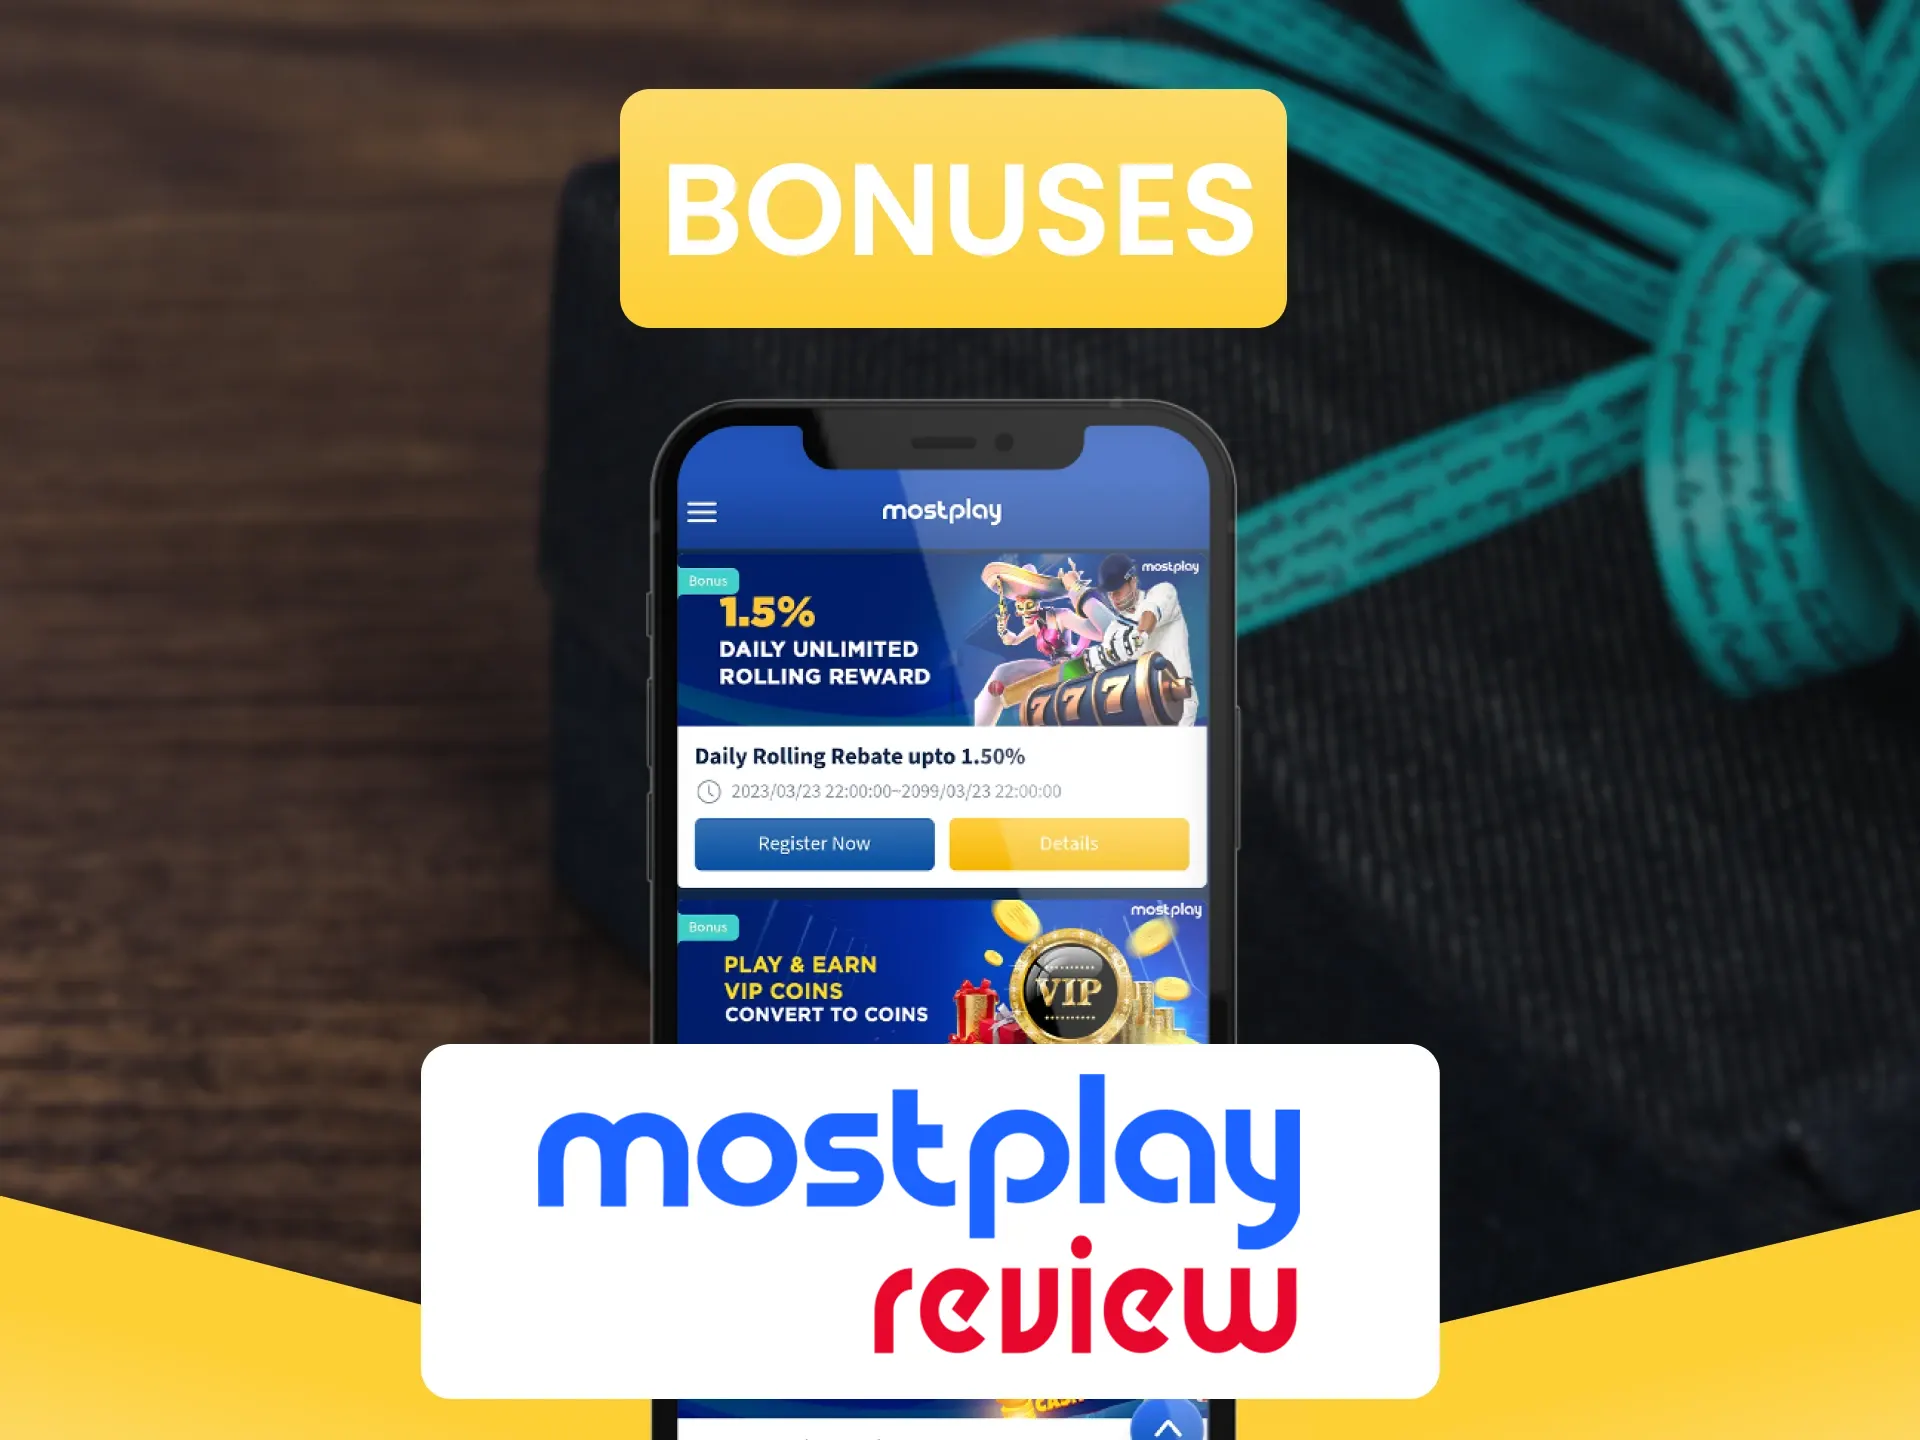 Get bonuses from Mostplay for board games.